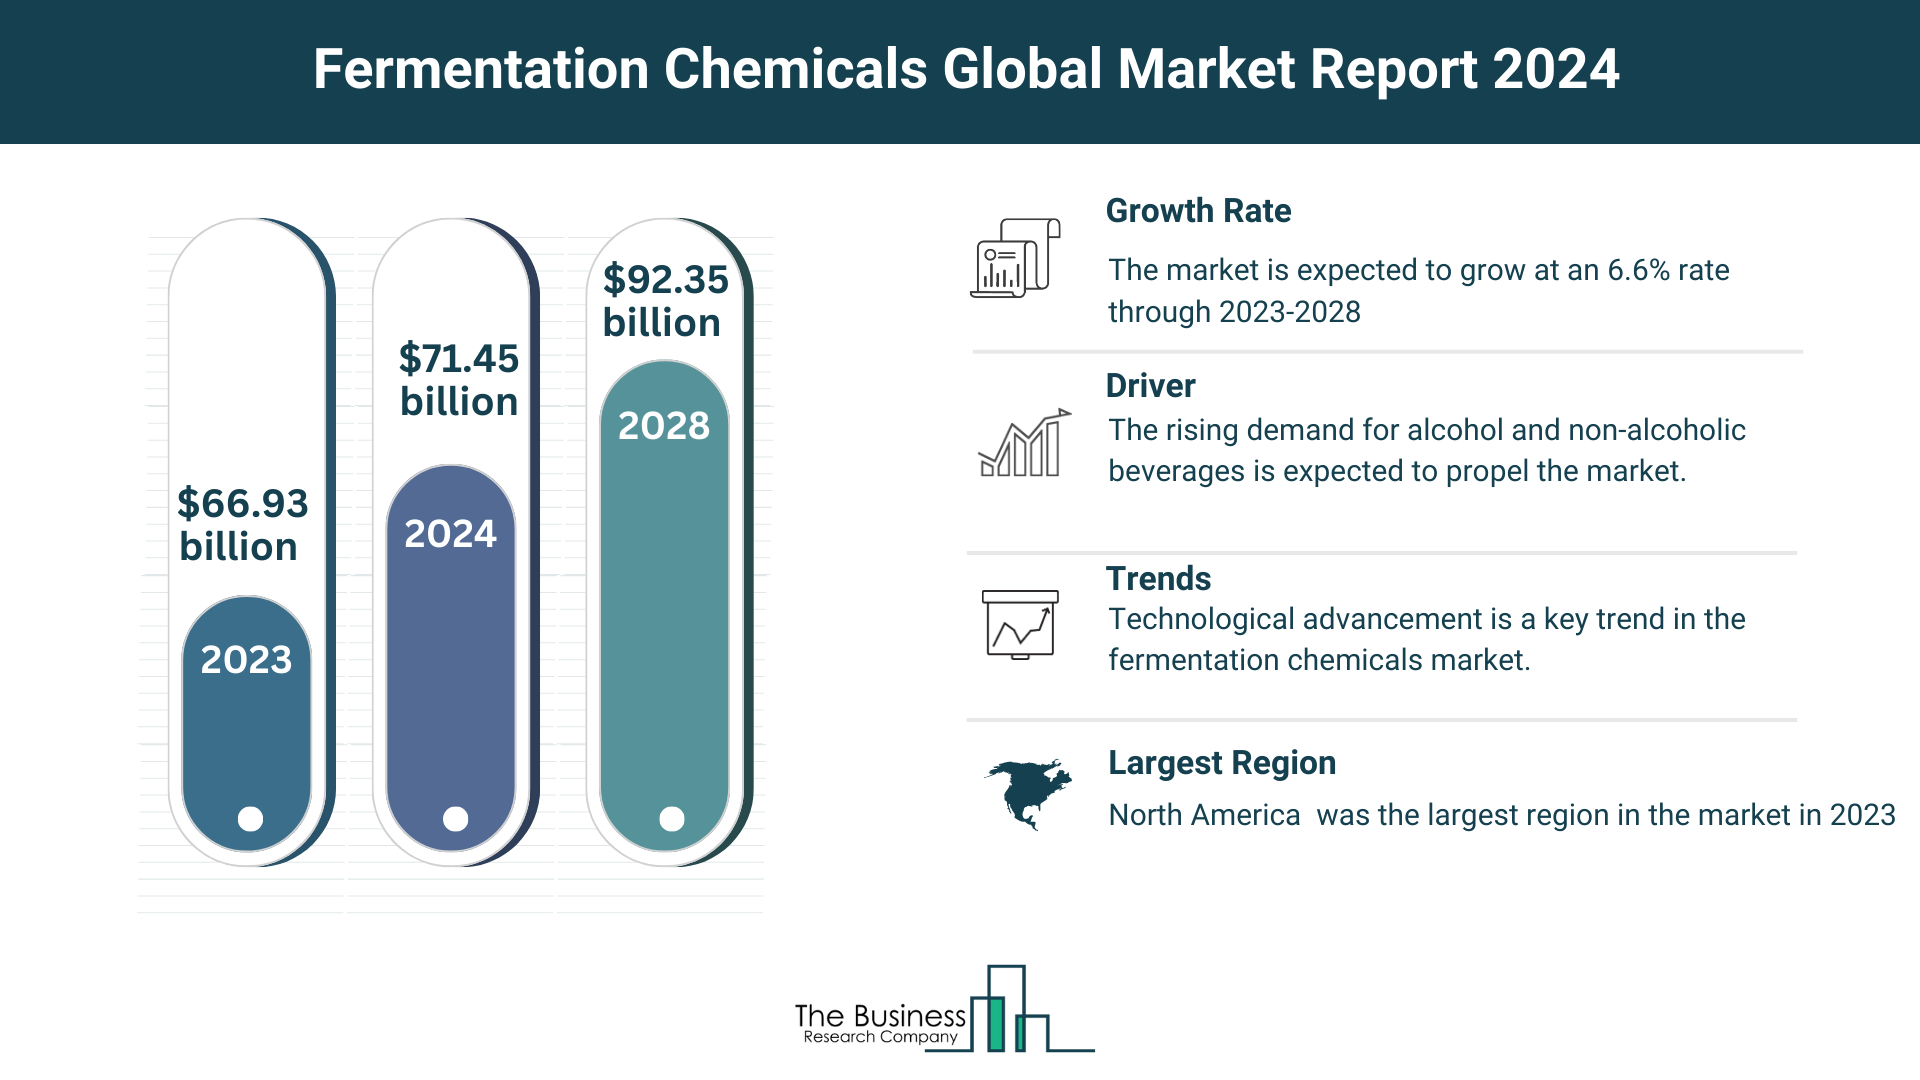 Global Fermentation Chemicals Market Analysis: Size, Drivers, Trends, Opportunities And Strategies